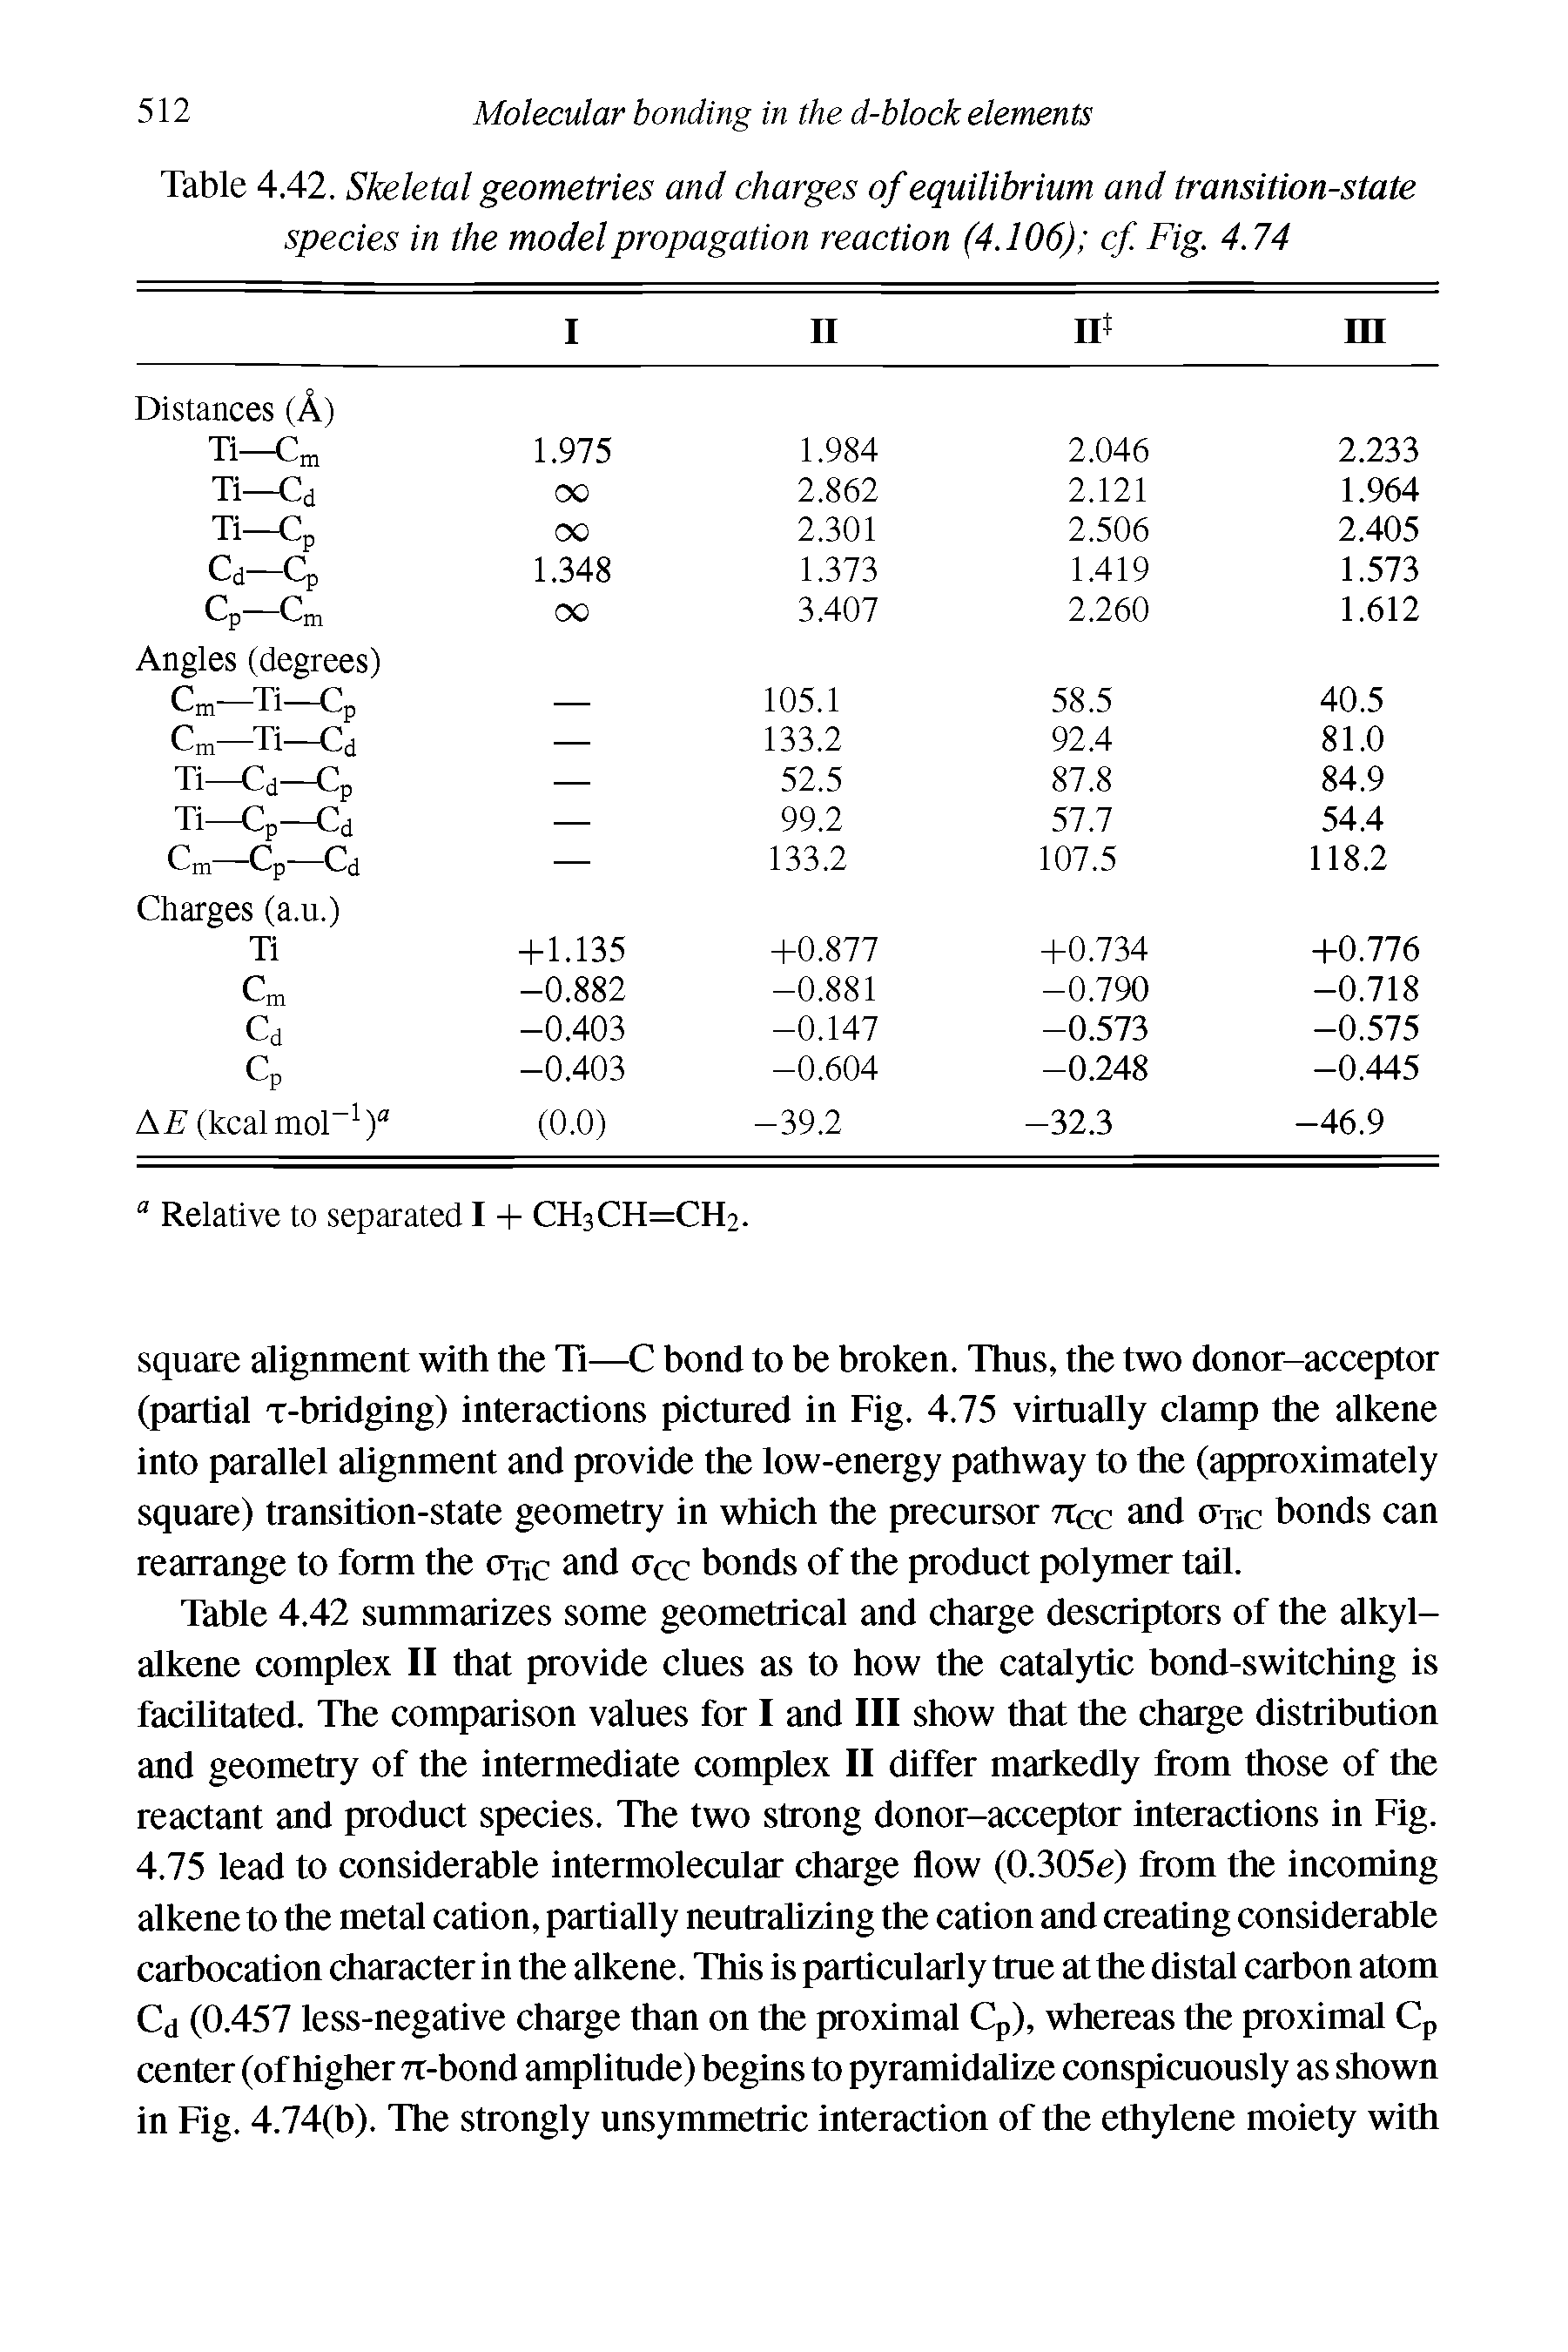 Table 4.42. Skeletal geometries and charges of equilibrium and transition-state species in the model propagation reaction (4.106) cf. Fig. 4.74...